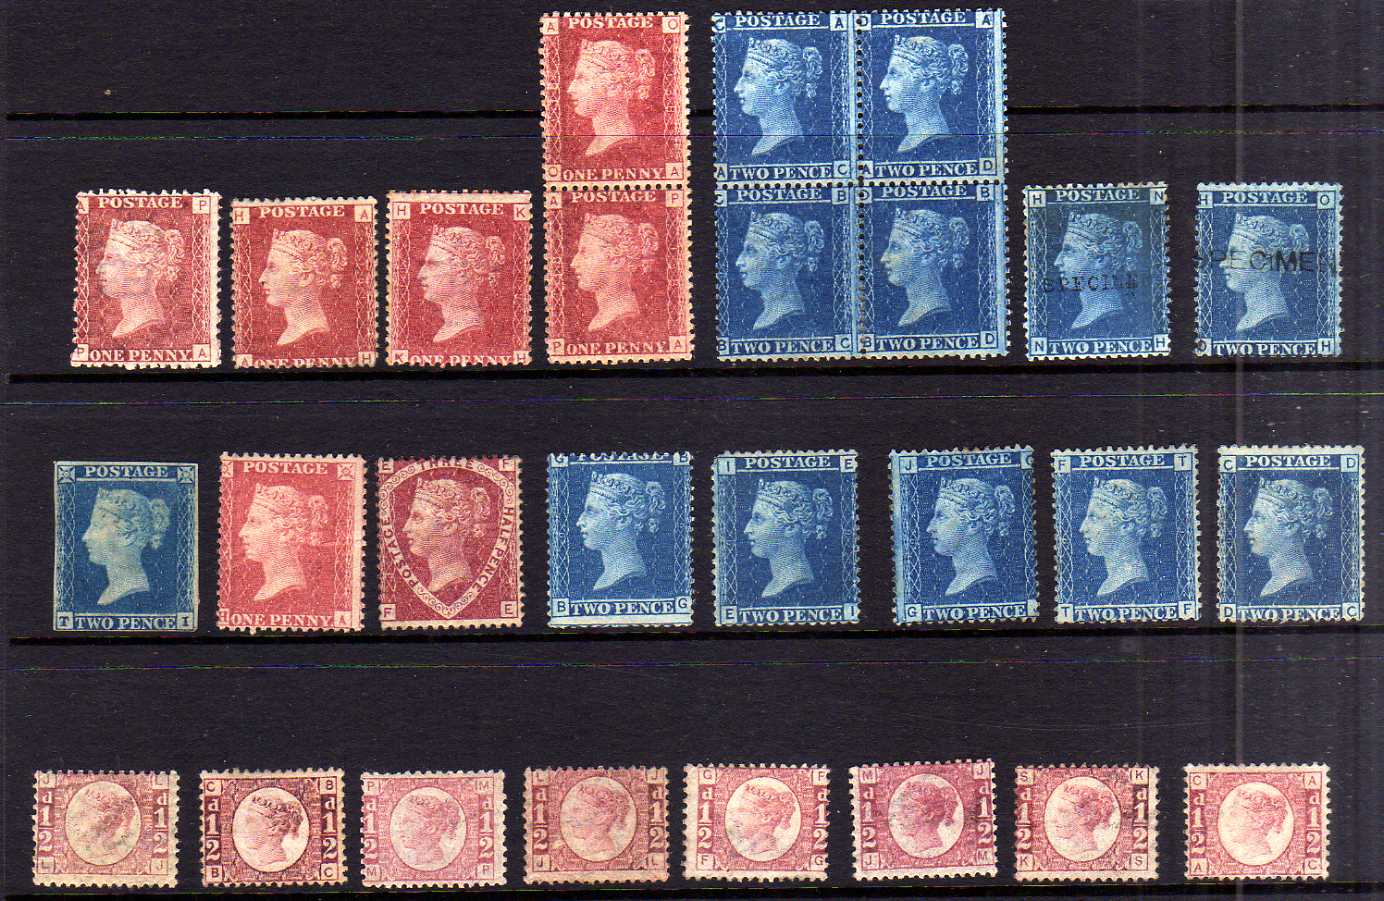 GB: 1841-79 LINE ENGRAVED UNUSED OR OG SELECTION FROM 1841 2d (DEFECTIVE), 1d PLATES (29), - Image 2 of 3